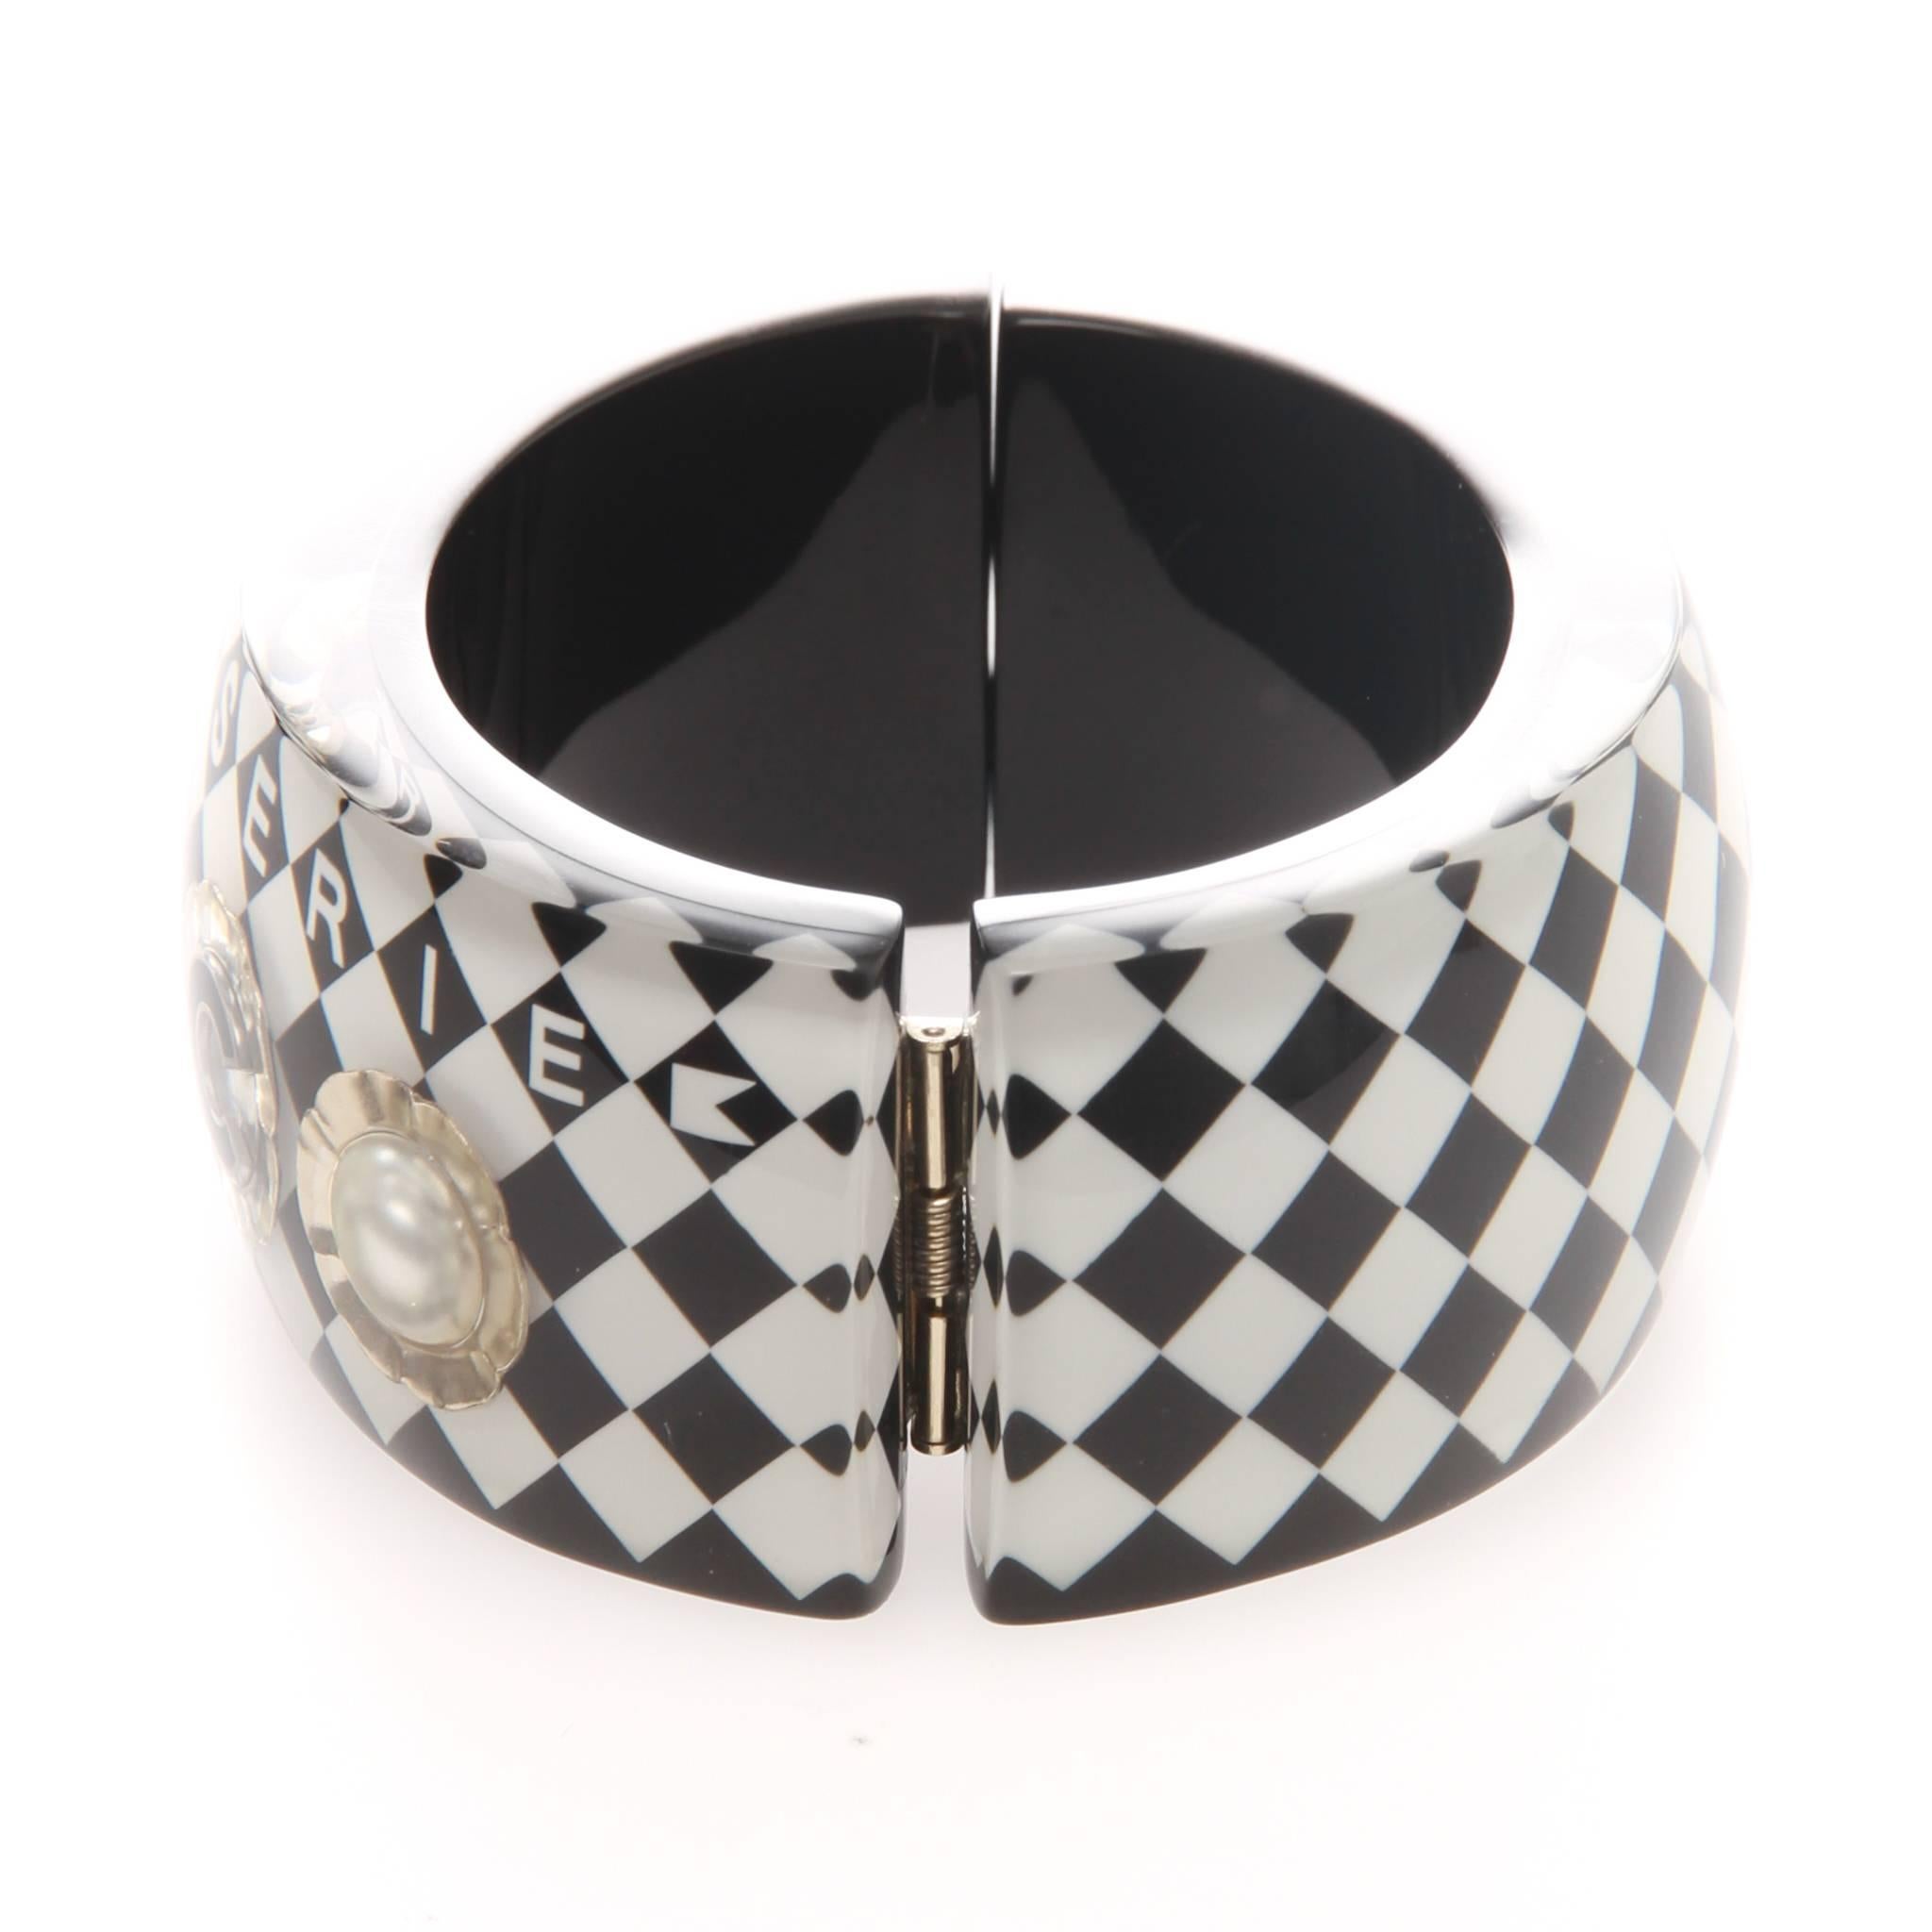 CHANEL Pearl Embellished COCO Brasserie Cafe Gabrielle Iconic CC Cuff Bracelet made for Fall 2015.

Comes with box